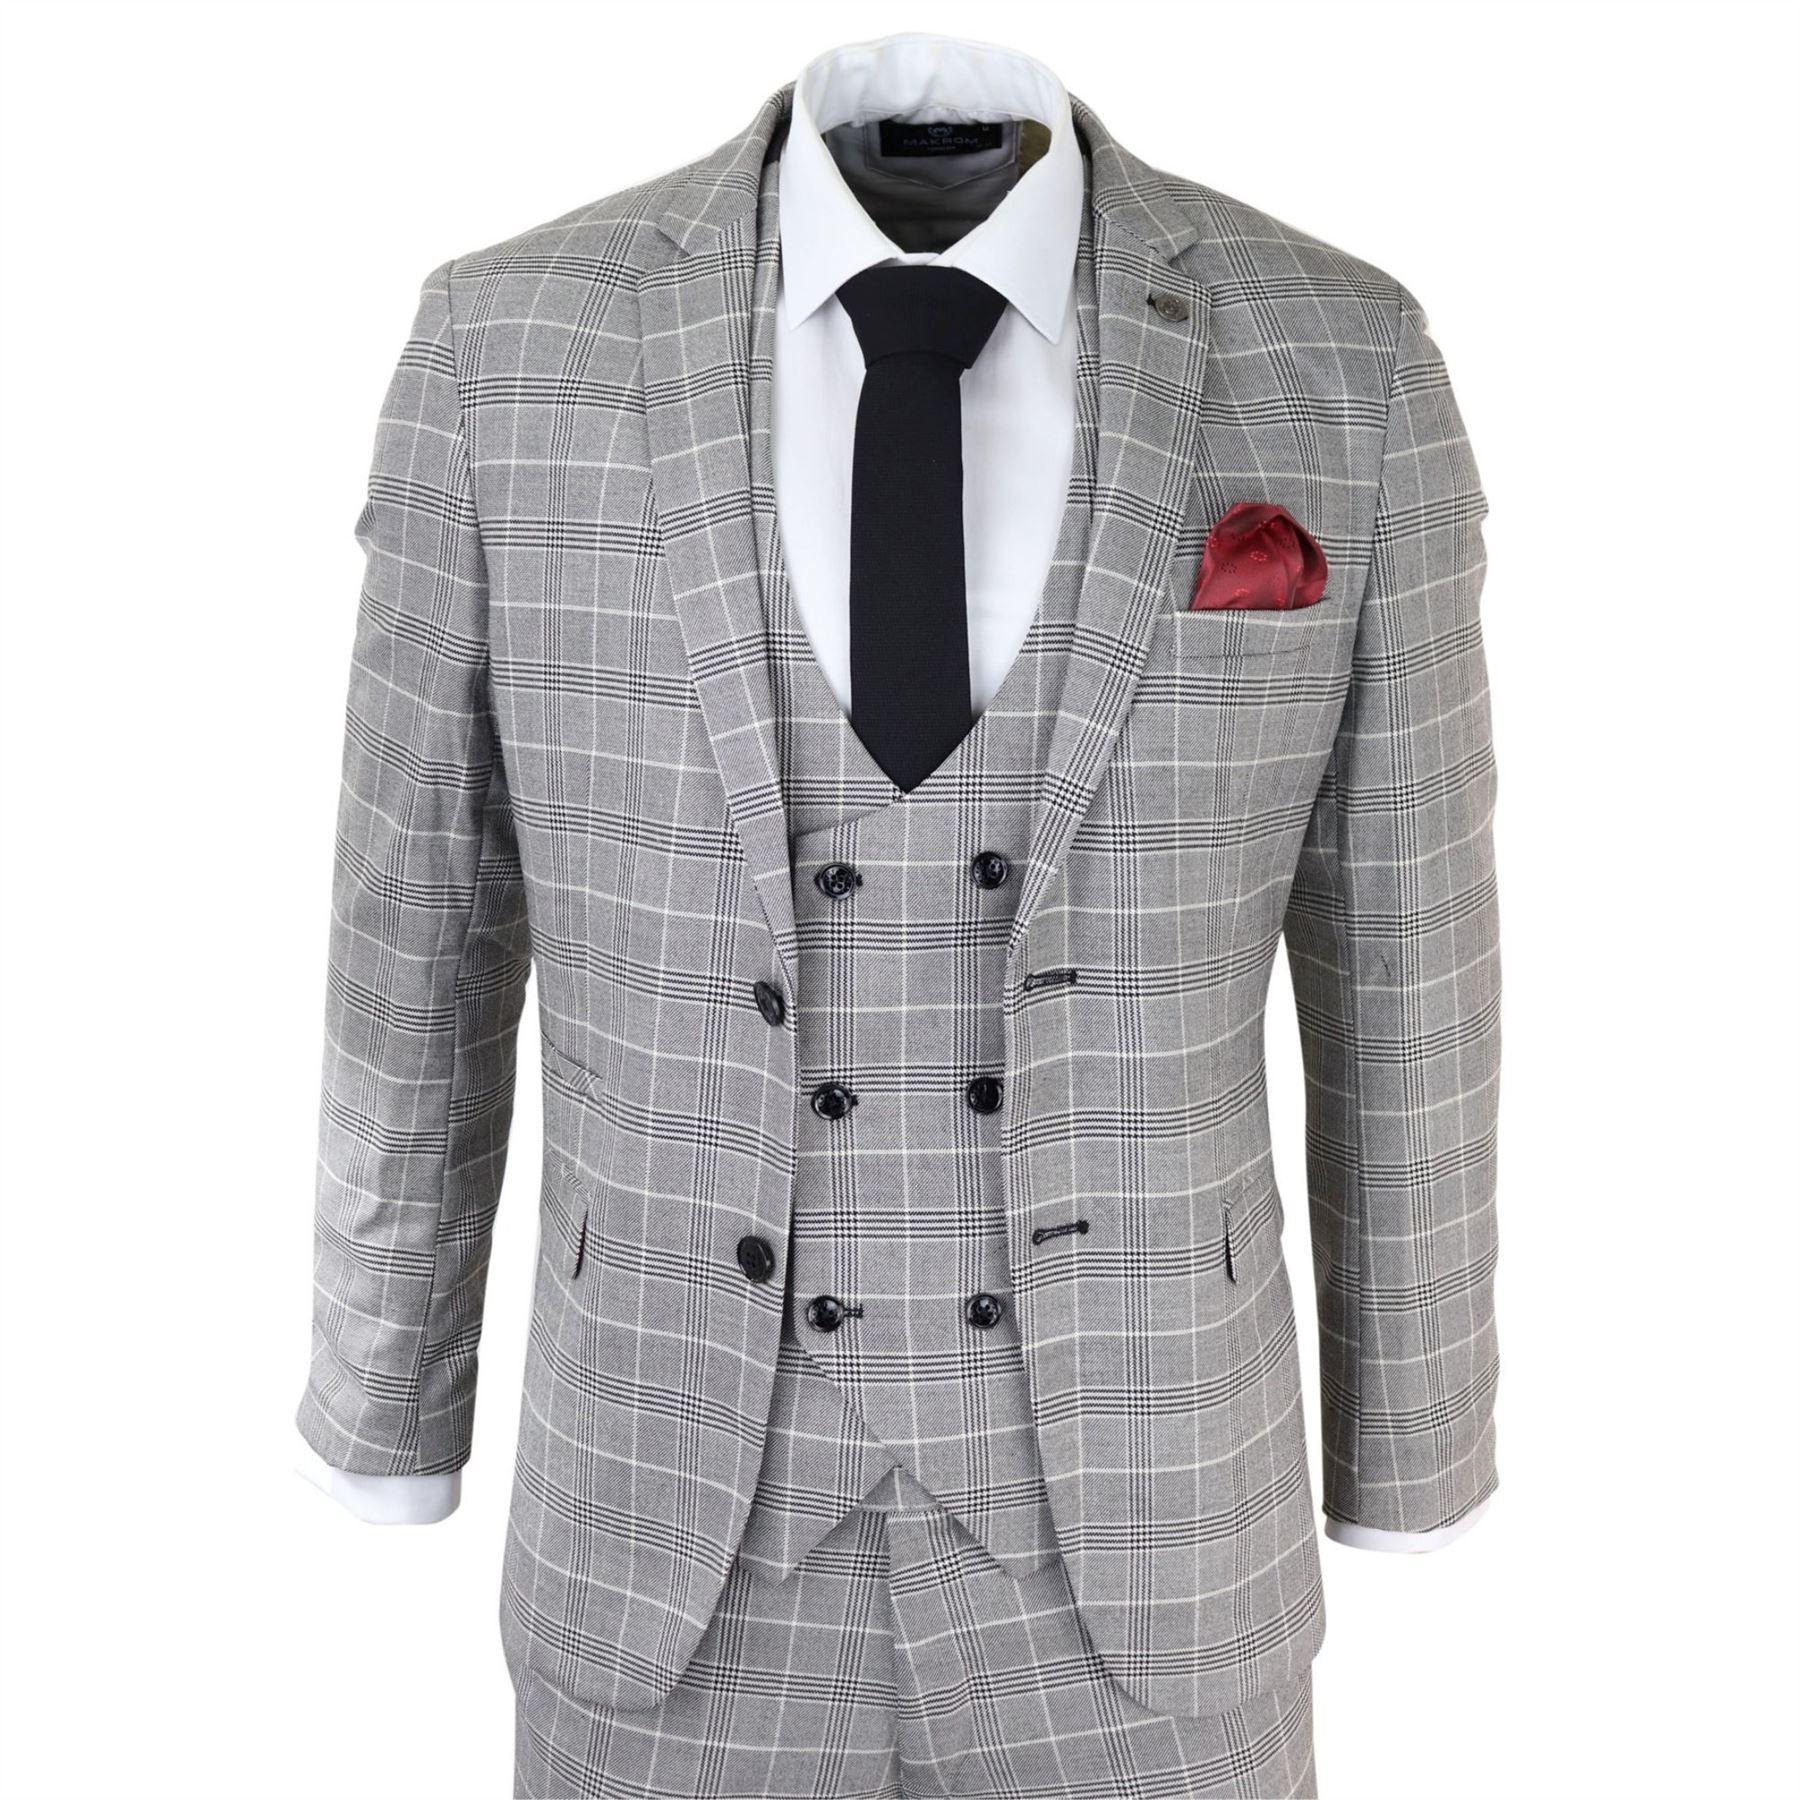 Mens Marc Darcy Grey Prince Of Wales Check Suit Ross Office Wedding Slim Fit Classic - Knighthood Store